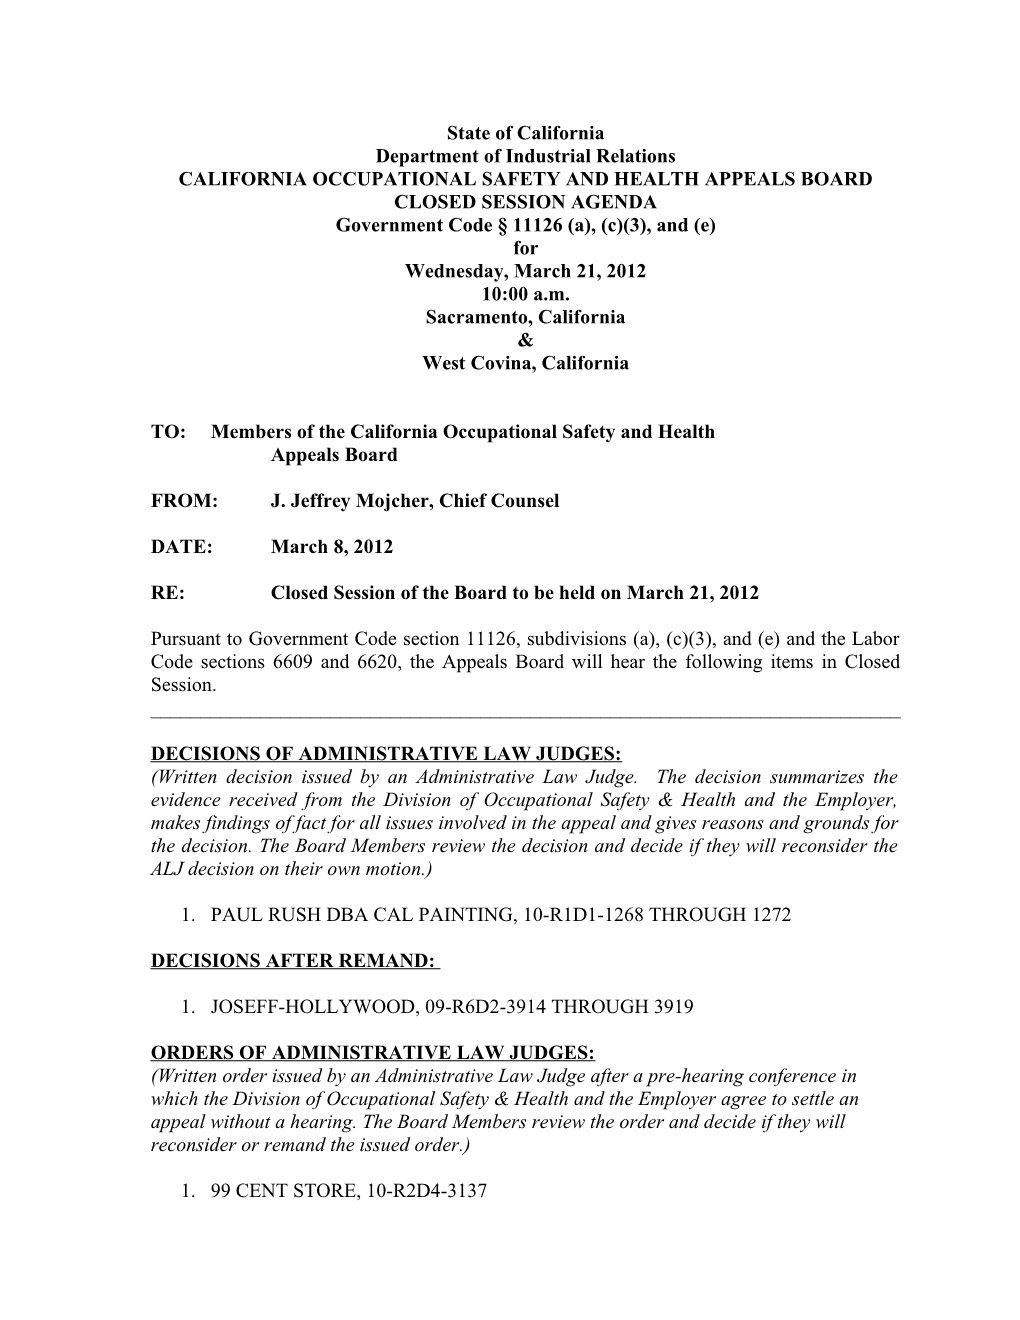 California Occupational Safety & Health Appeals Board s7